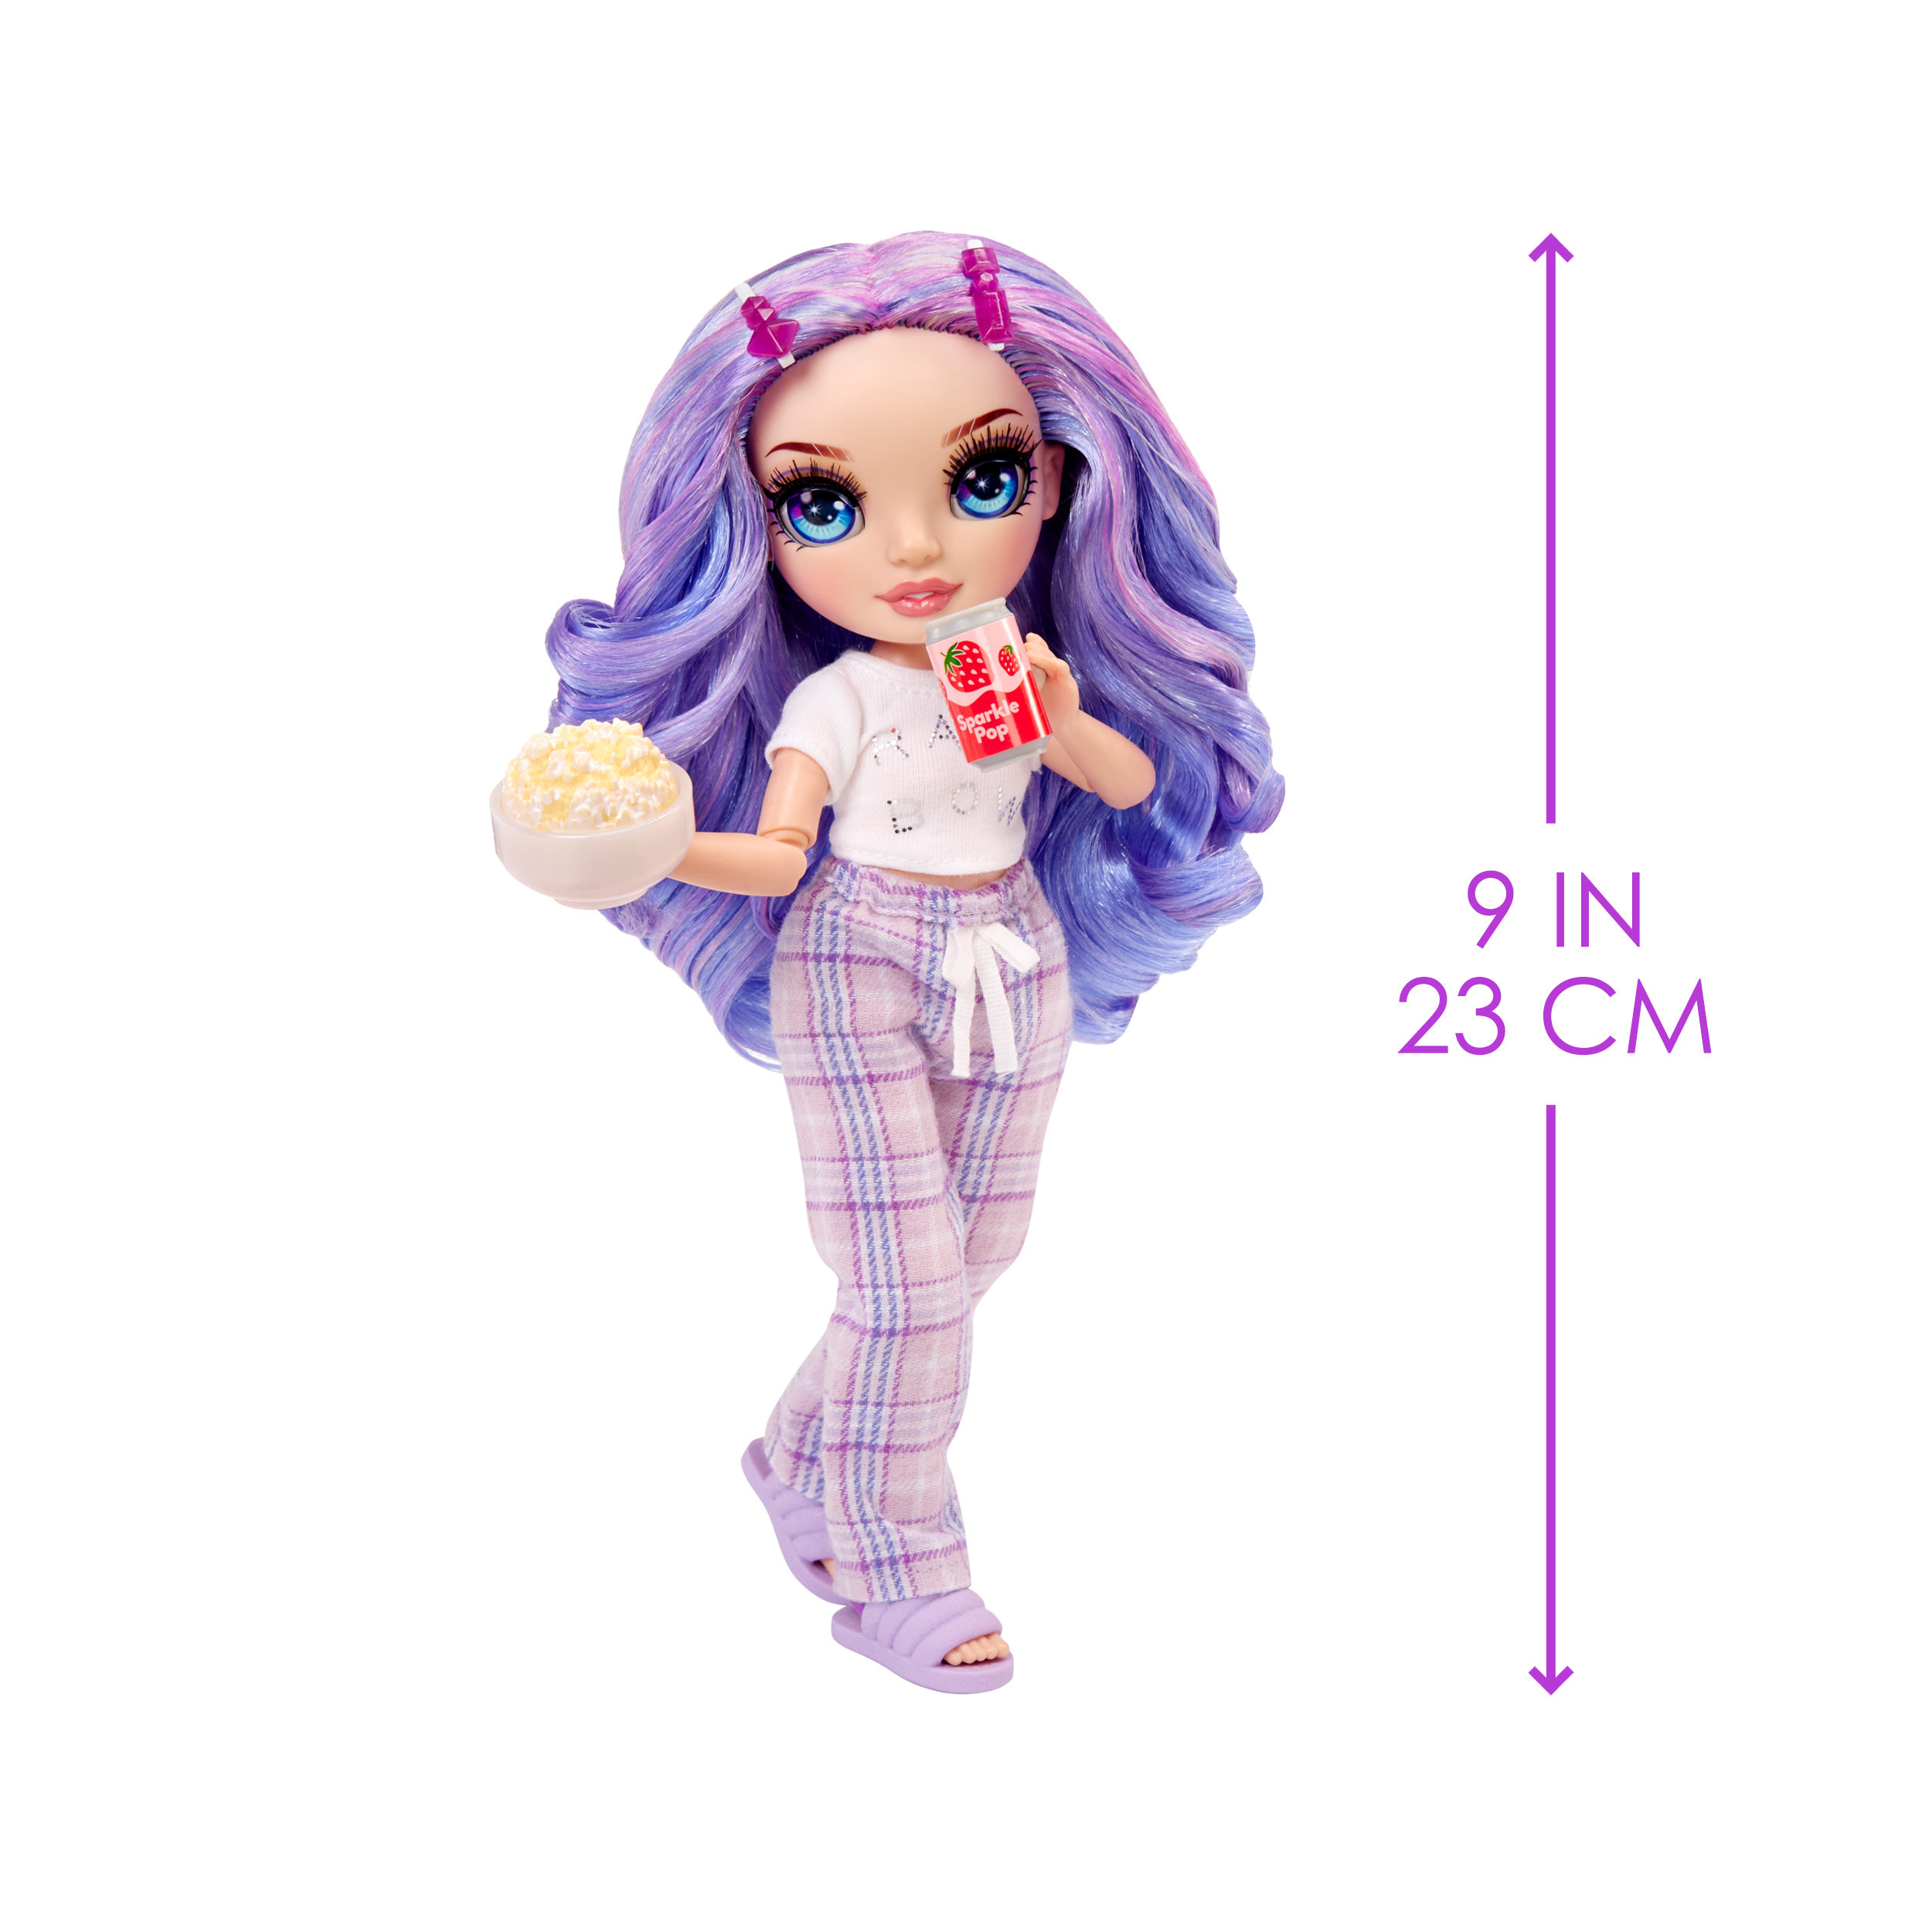 Rainbow High Jr High PJ Party Violet, Purple 9” Posable Doll, Soft Onesie, Slippers, Play Accessories, Kids Toy Ages 4-12 - image 4 of 8